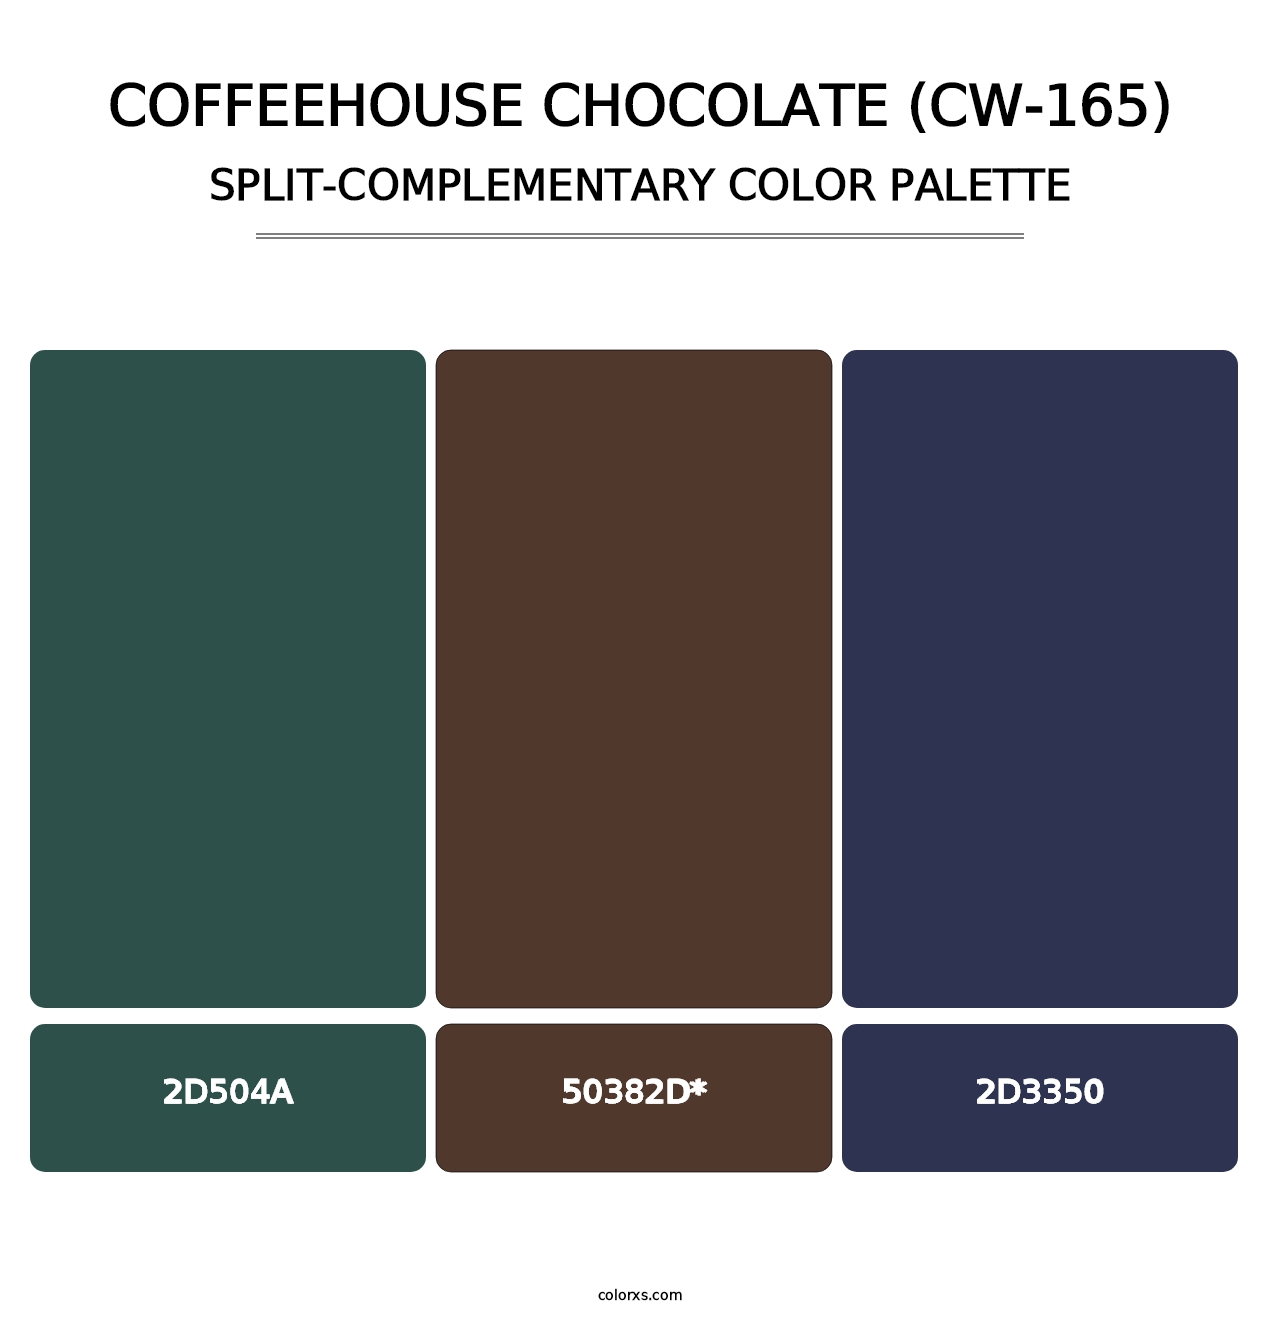 Coffeehouse Chocolate (CW-165) - Split-Complementary Color Palette